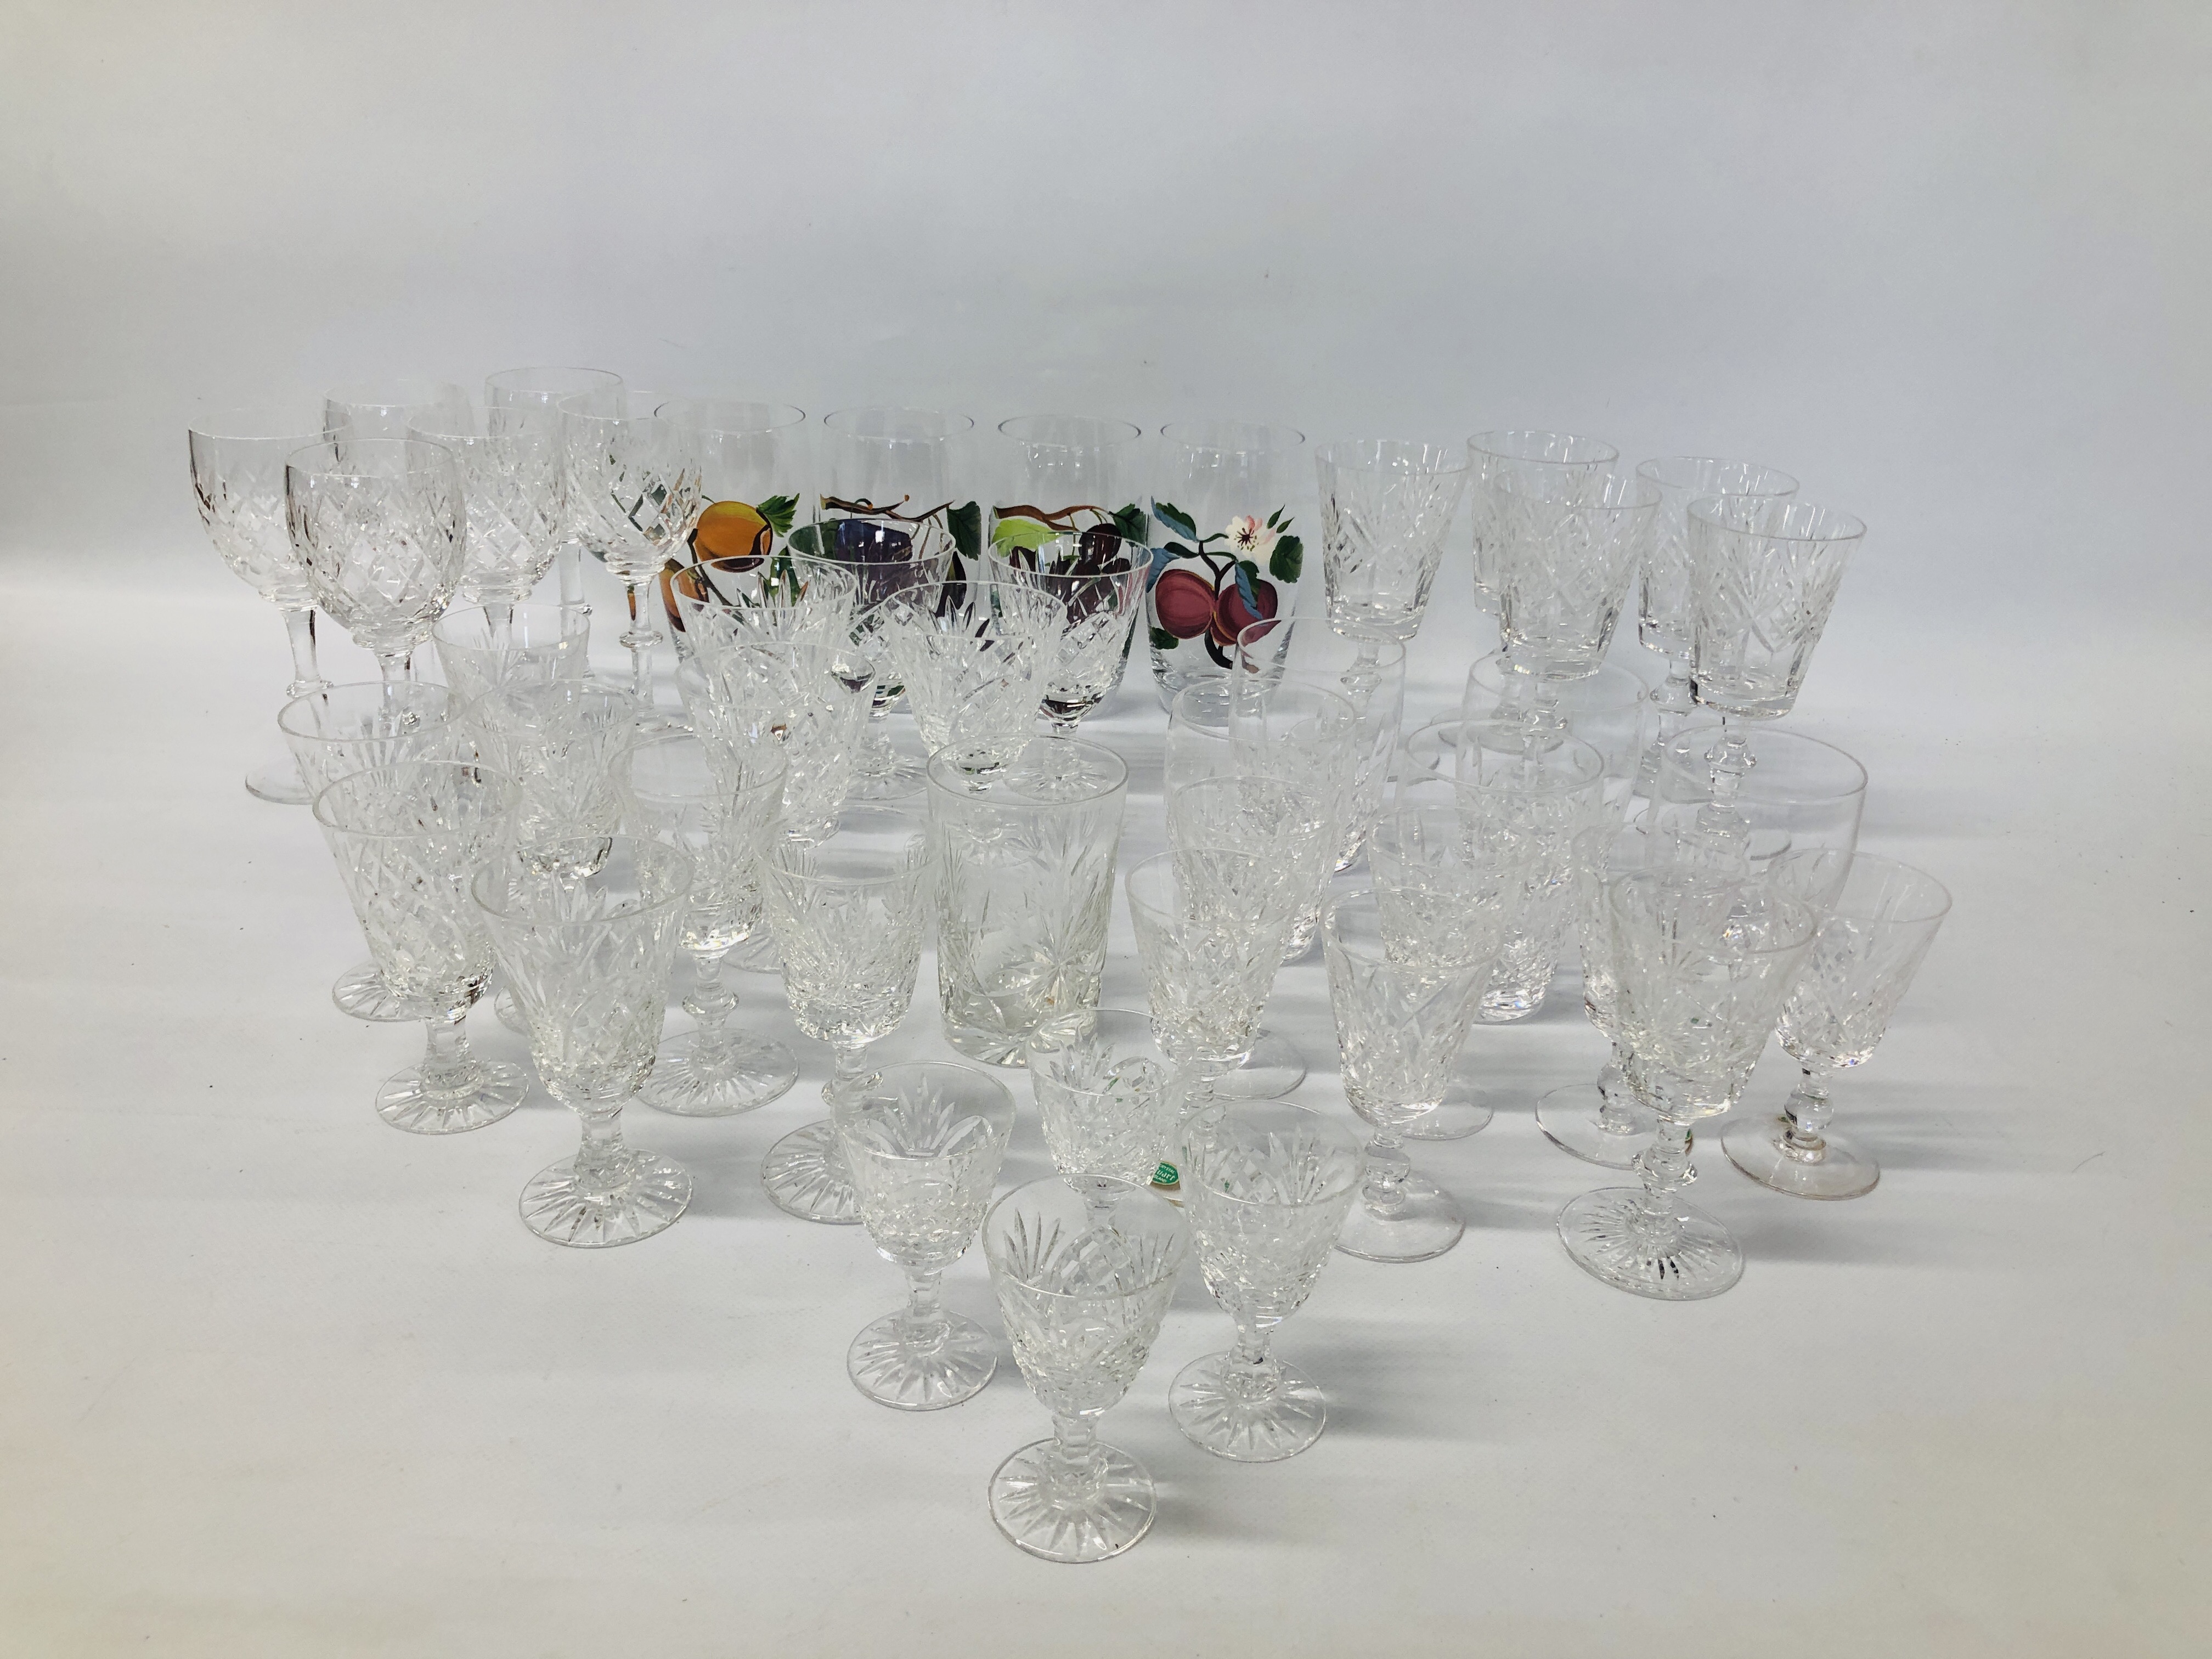 COLLECTION OF GOOD QUALITY CUT GLASS CRYSTAL DRINKING VESSELS ALONG WITH A SET OF 4 HAND PAINTED - Image 2 of 11